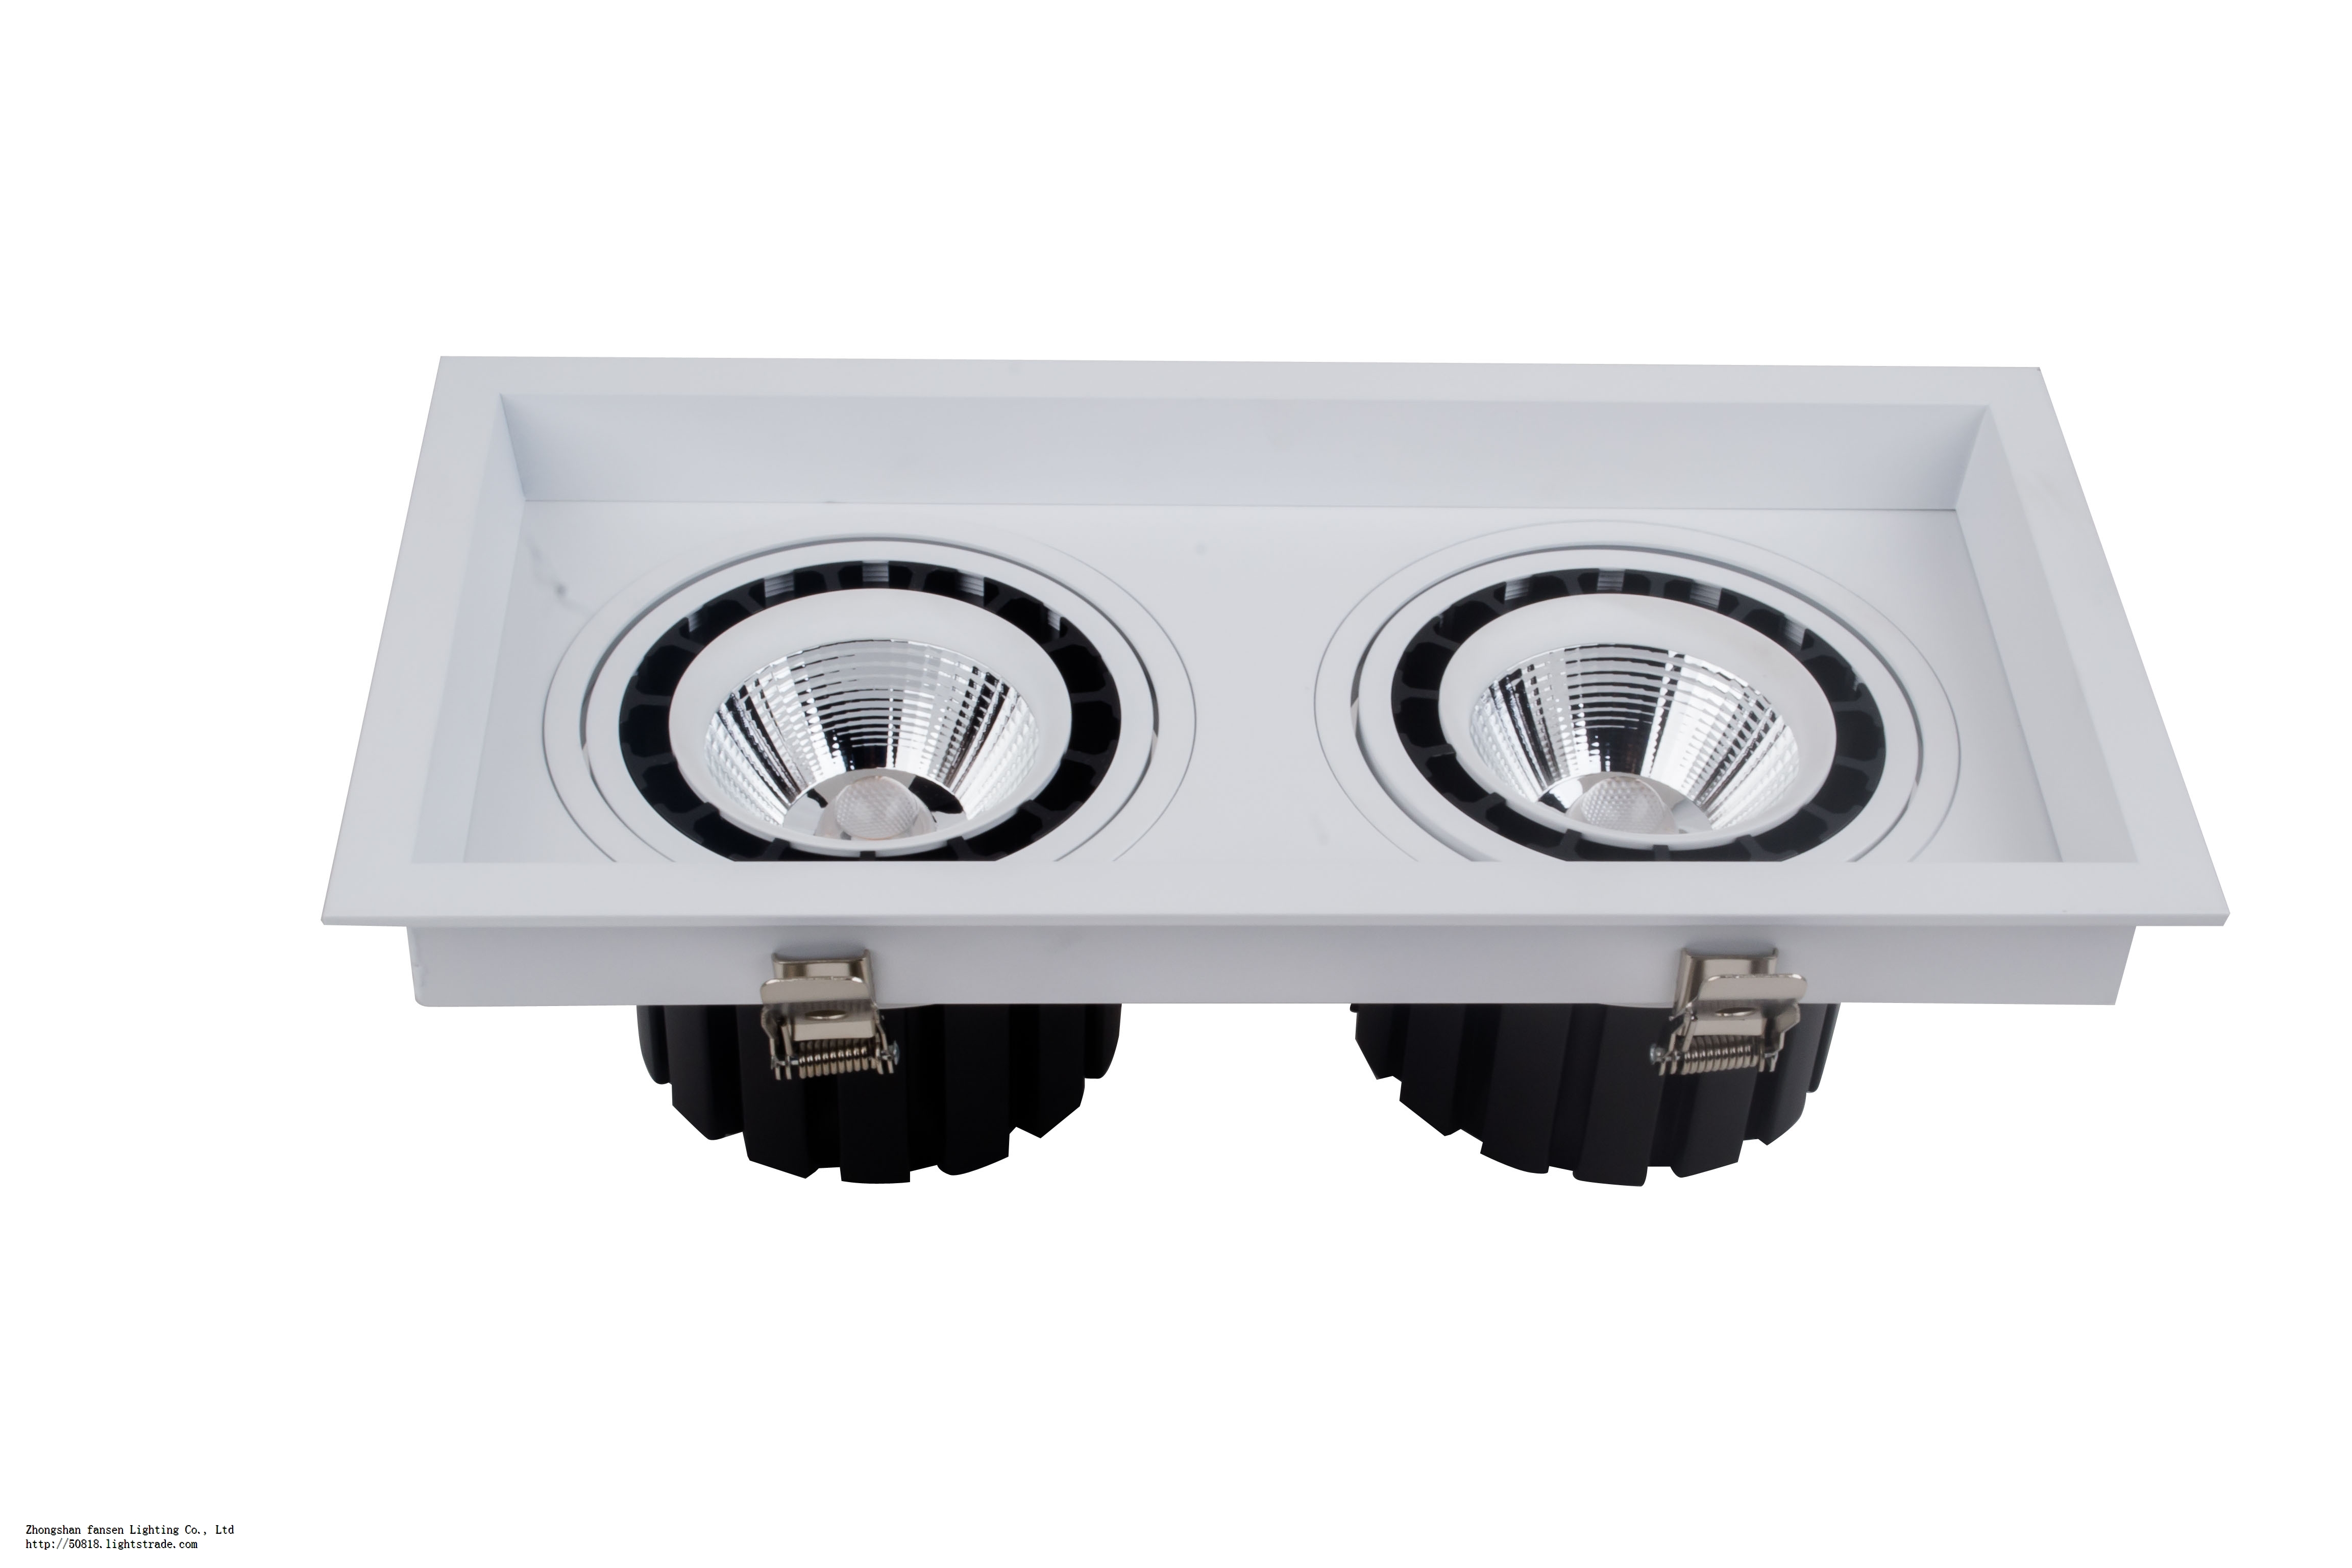 28WLED Recessed Down Light